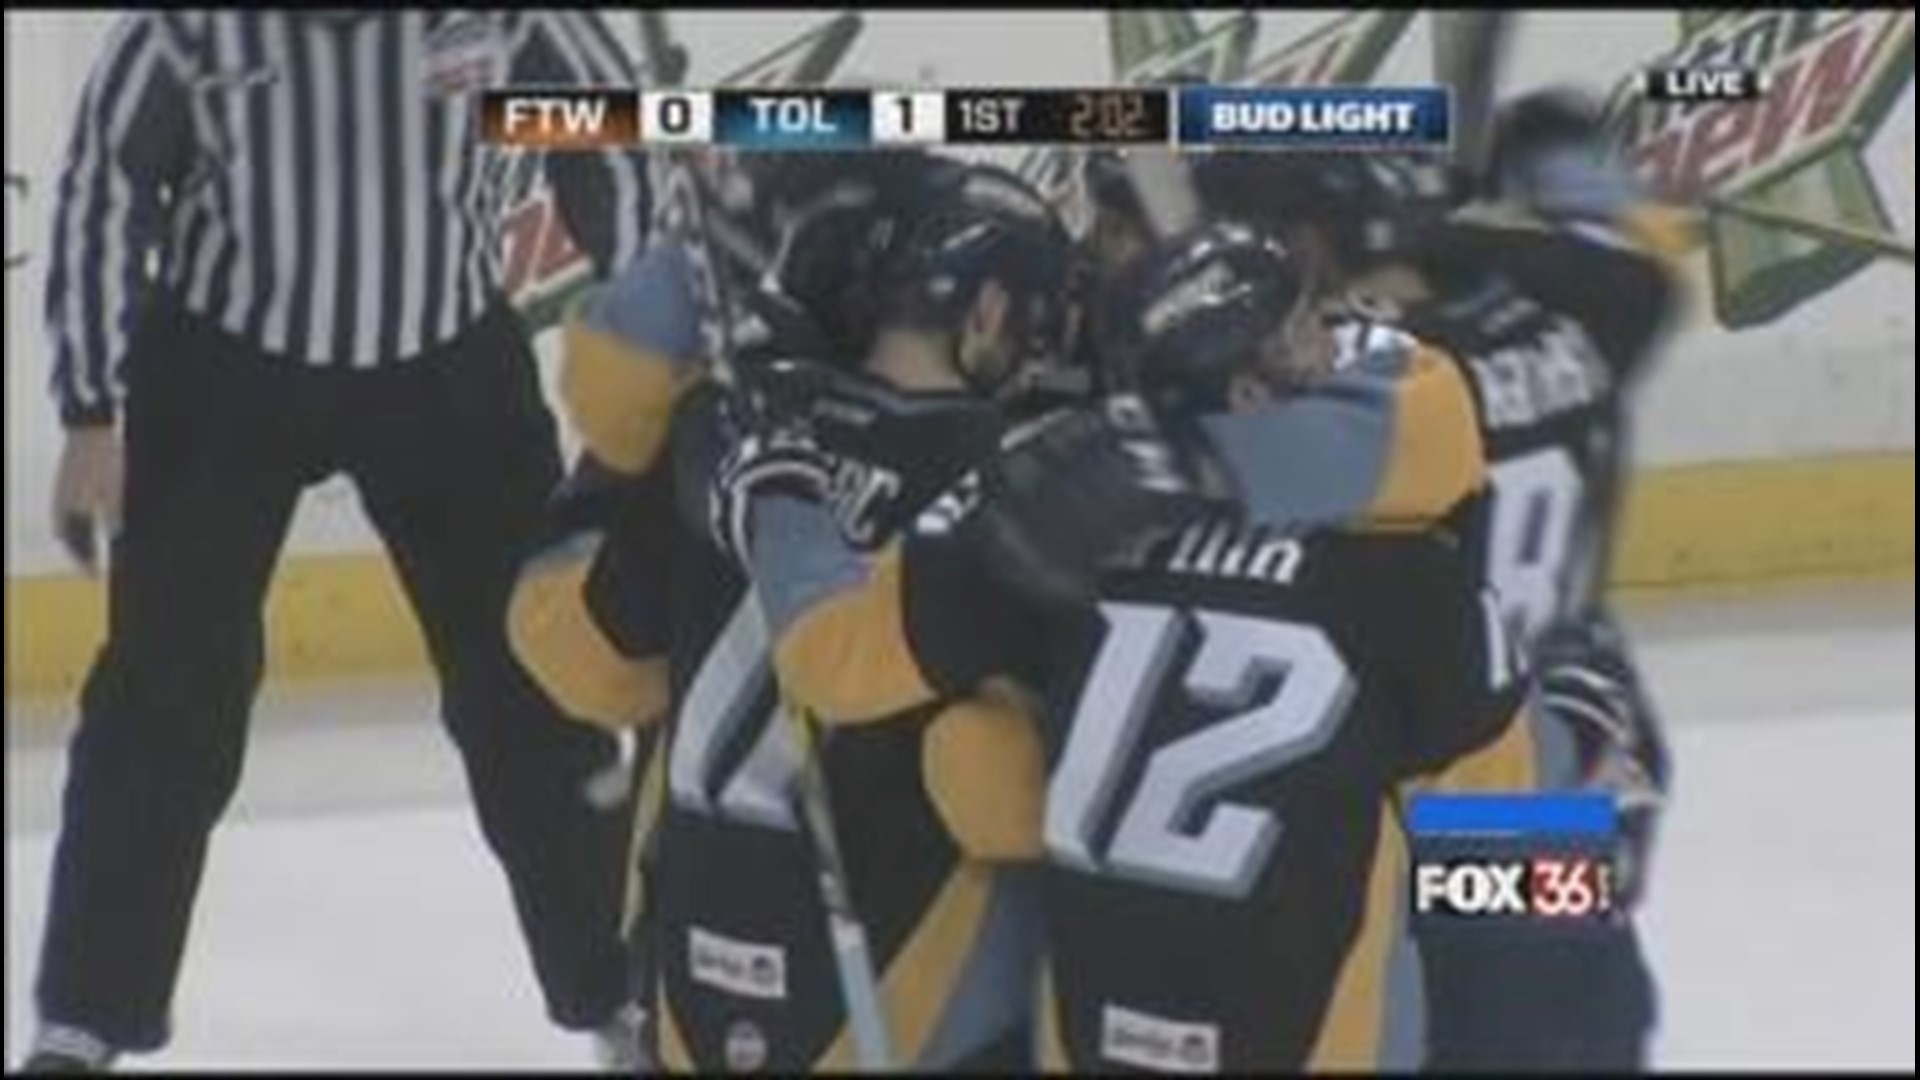 Toledo Walleye win playoff series with Fort Wayne, beating the Komets 5-0 in game five